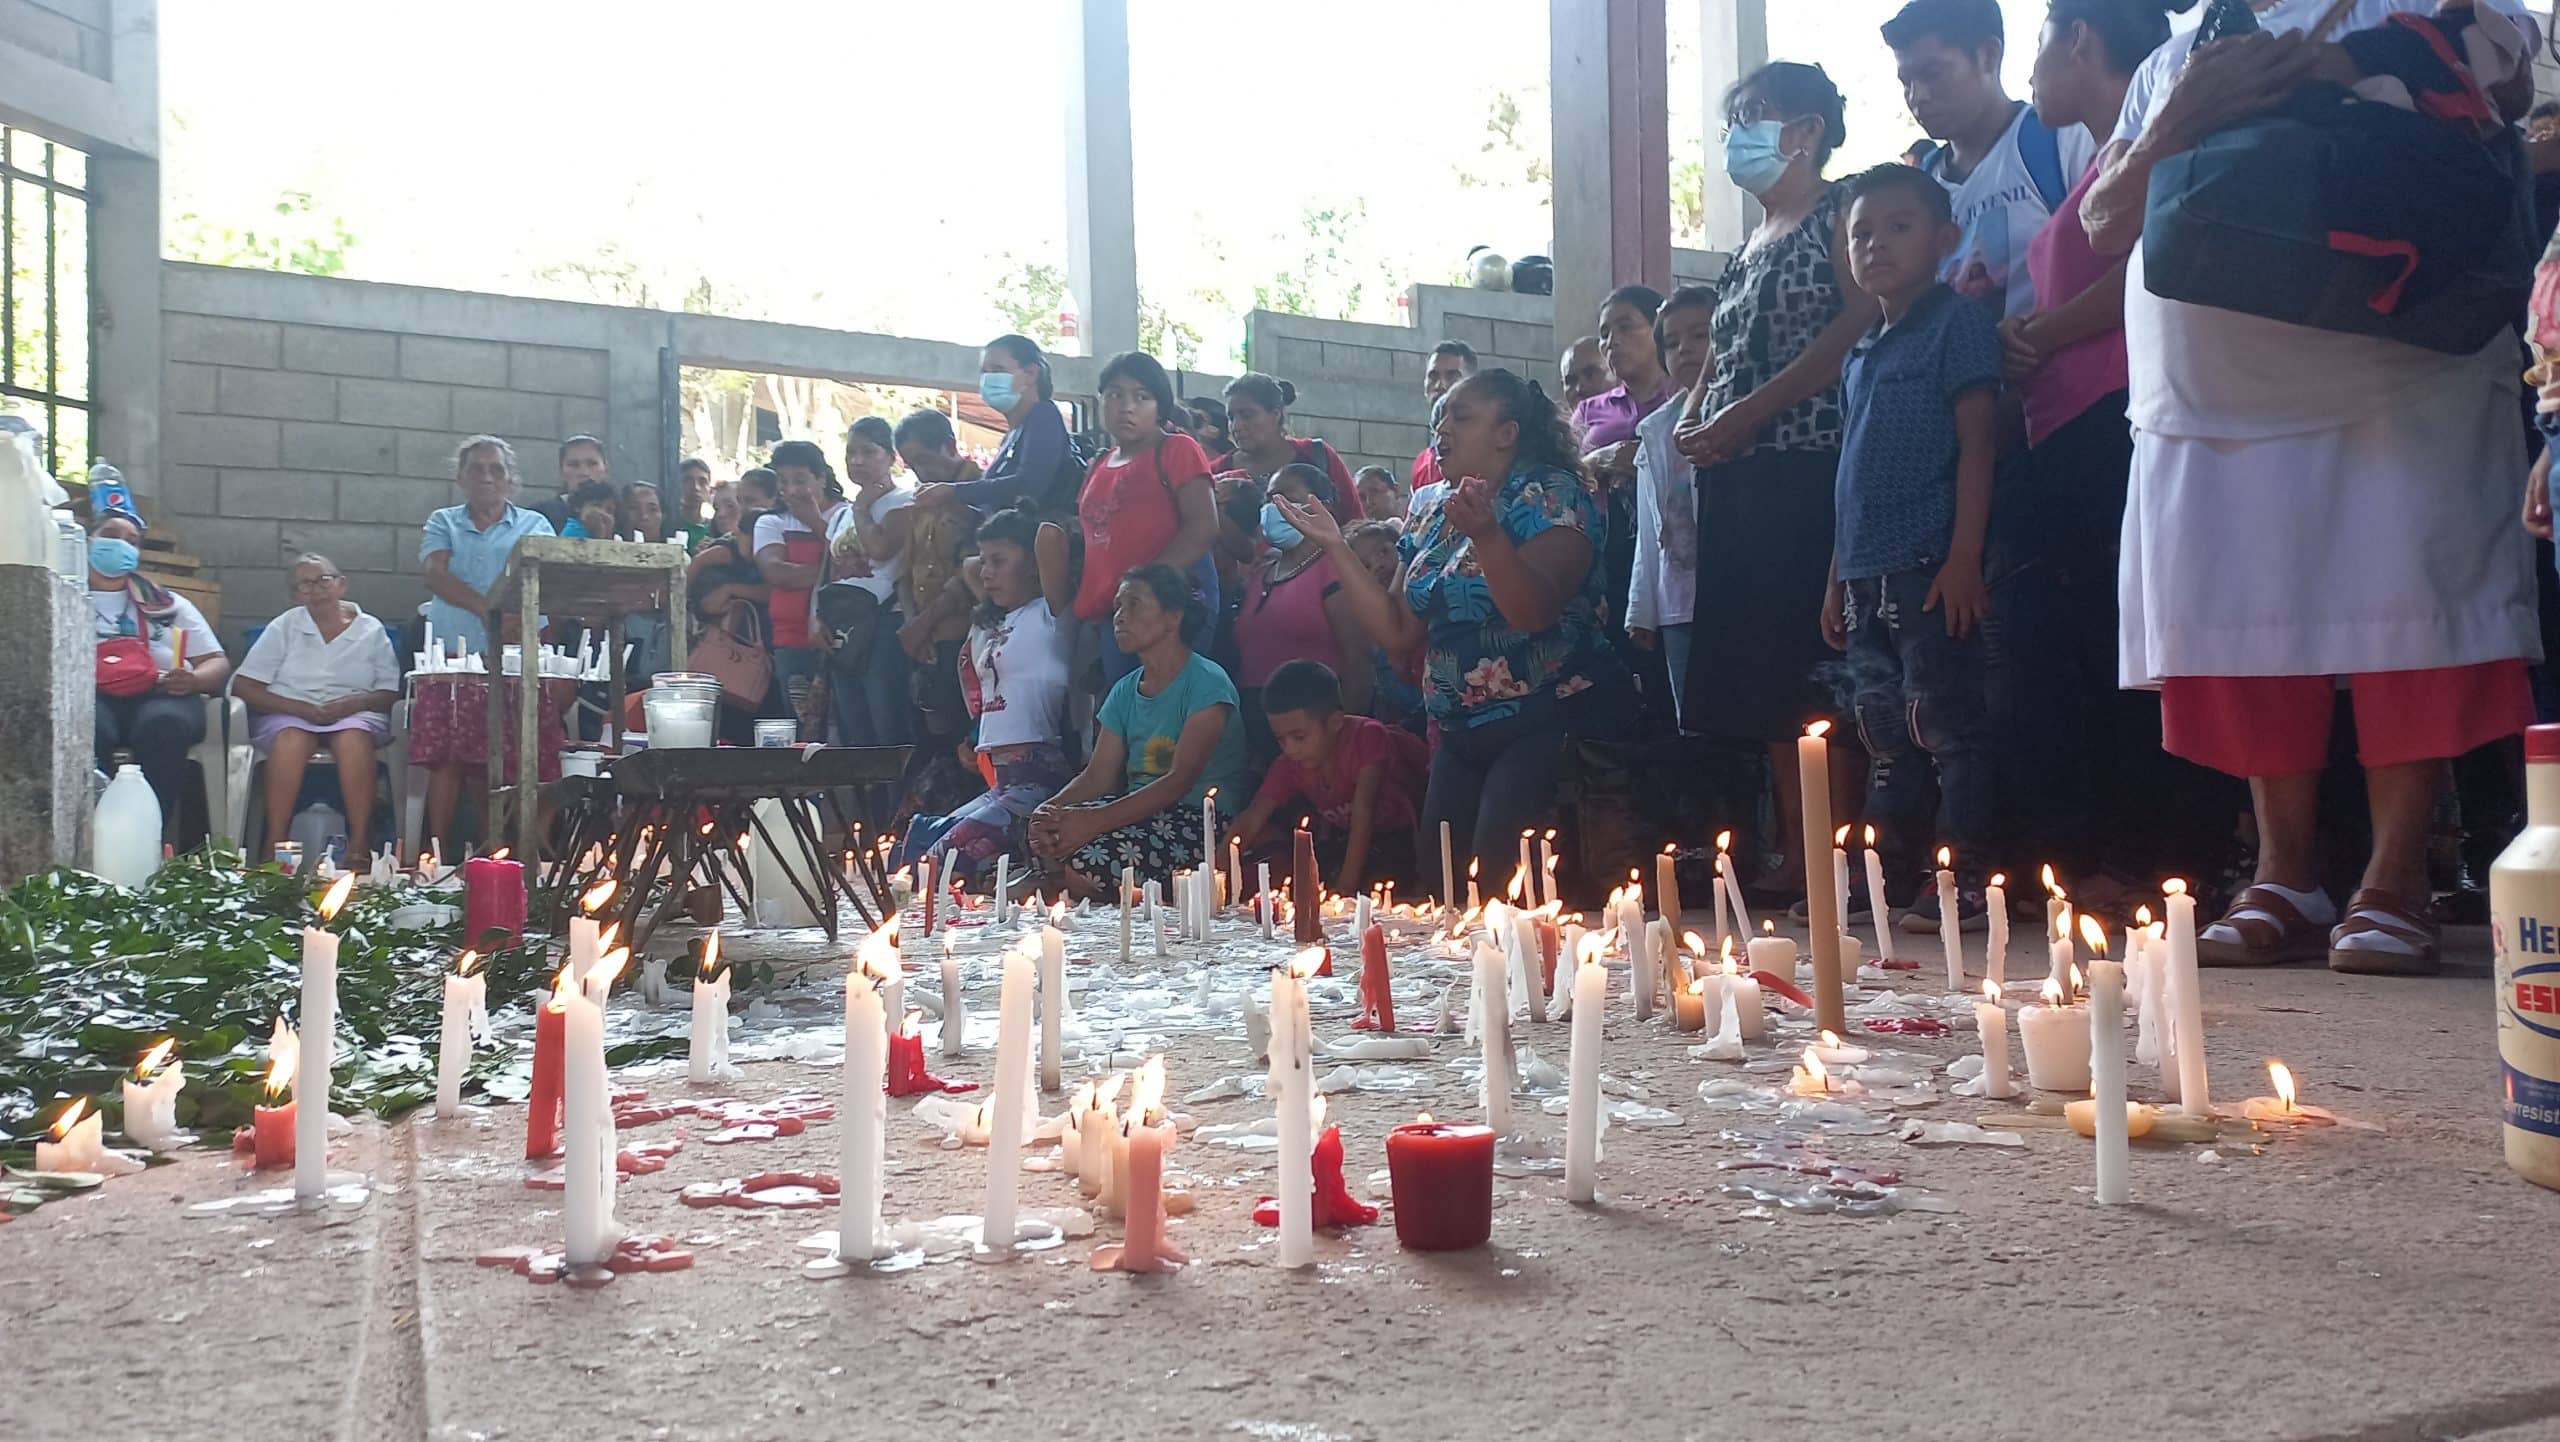 Matagalpa celebrates shouting without the episcopal cry of its bishop imprisoned by Ortega